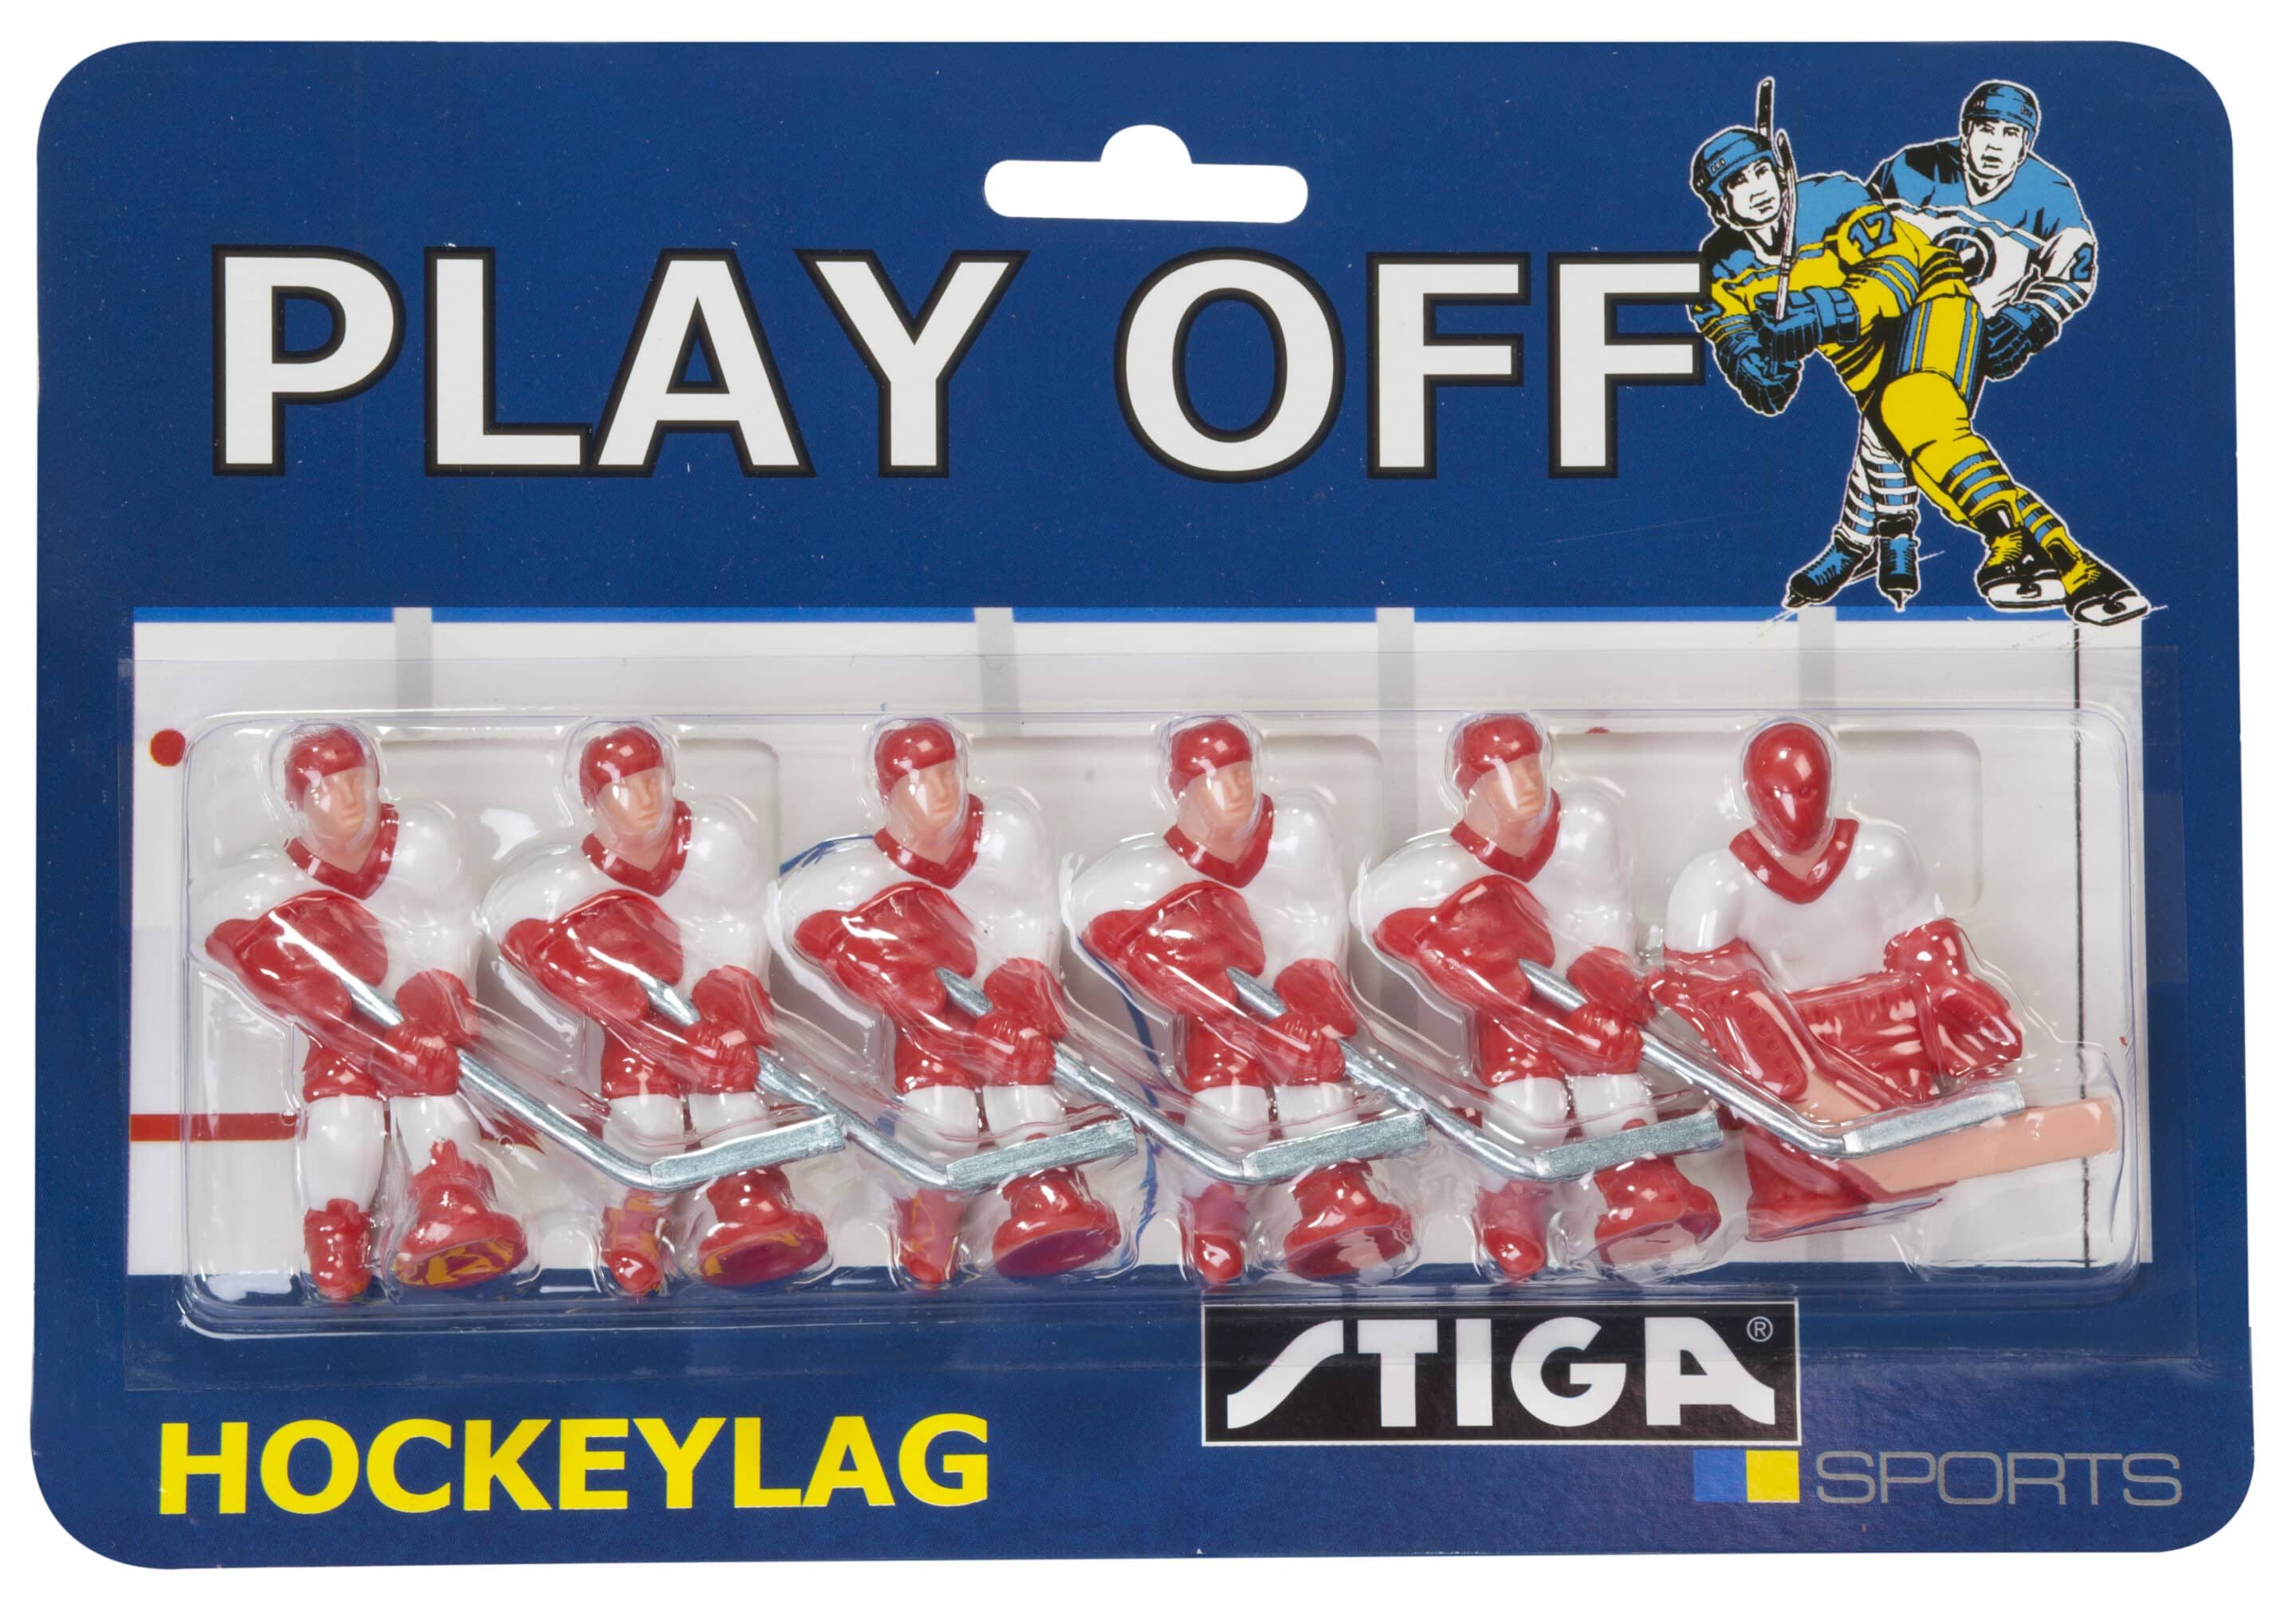 Stiga Table Top Hockey Replacement Team 7111 9080 04 Canada